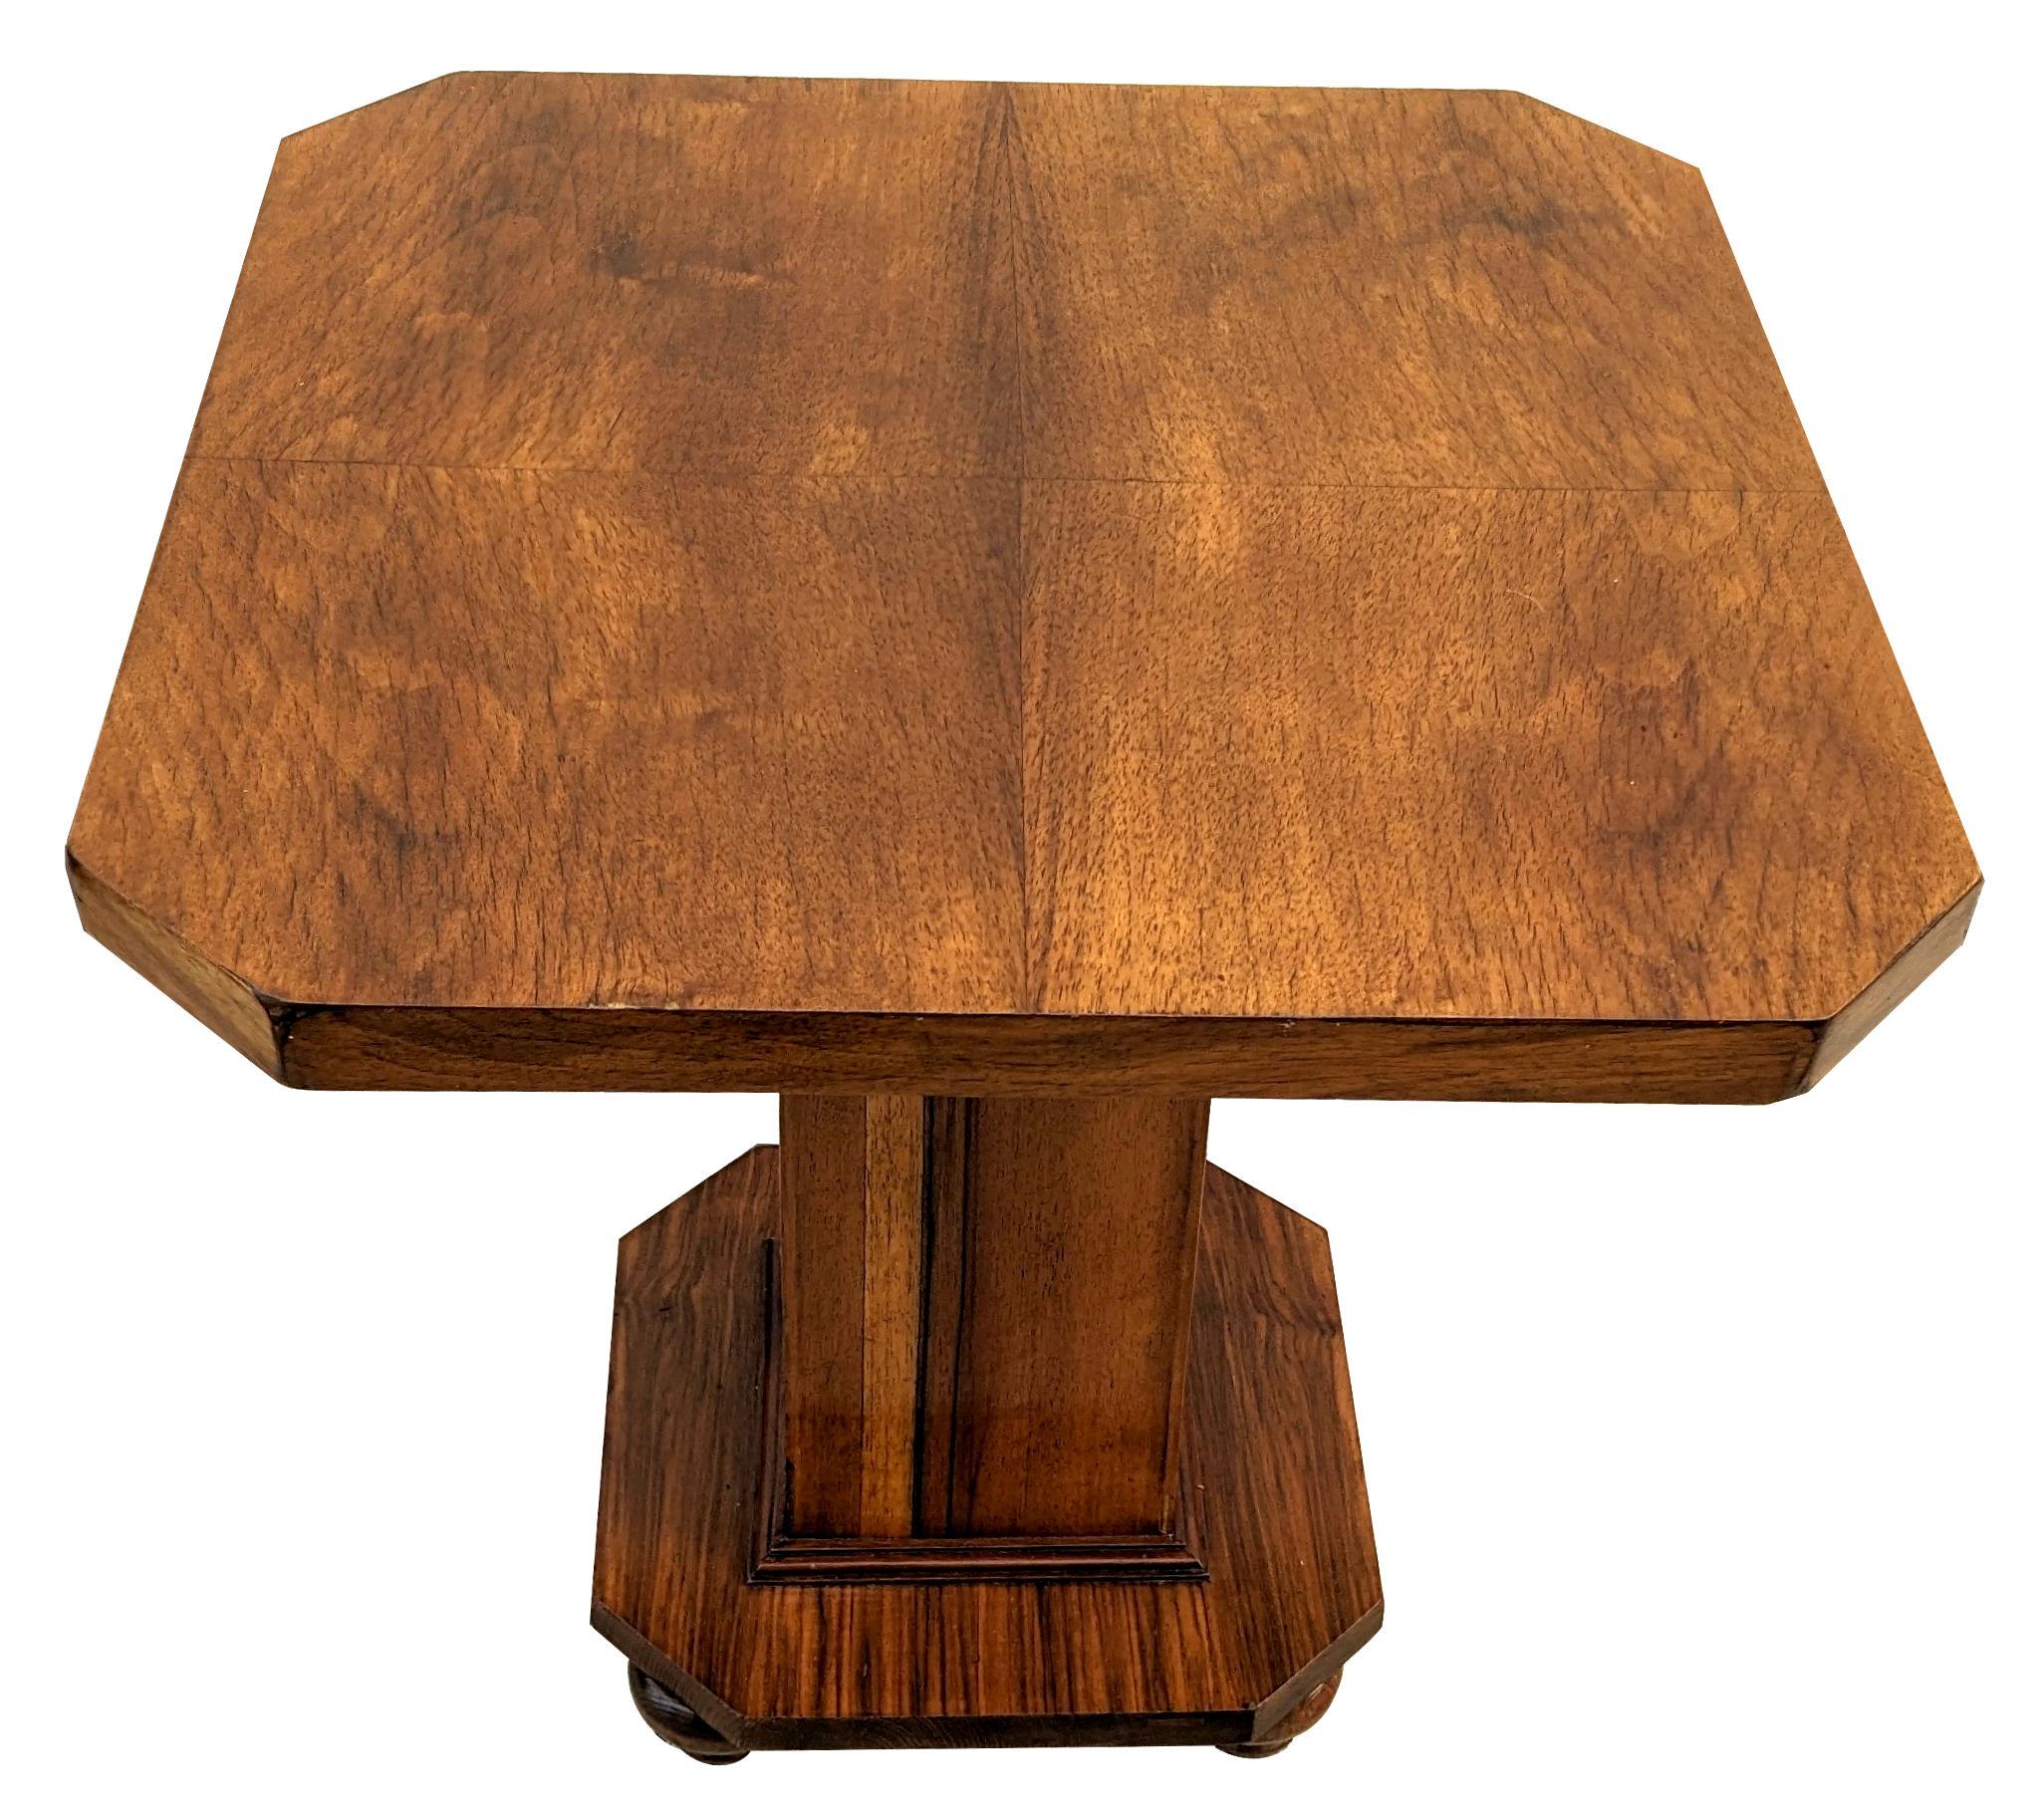 Art Deco Walnut Occasional Table, c1930s, English In Good Condition For Sale In Devon, England